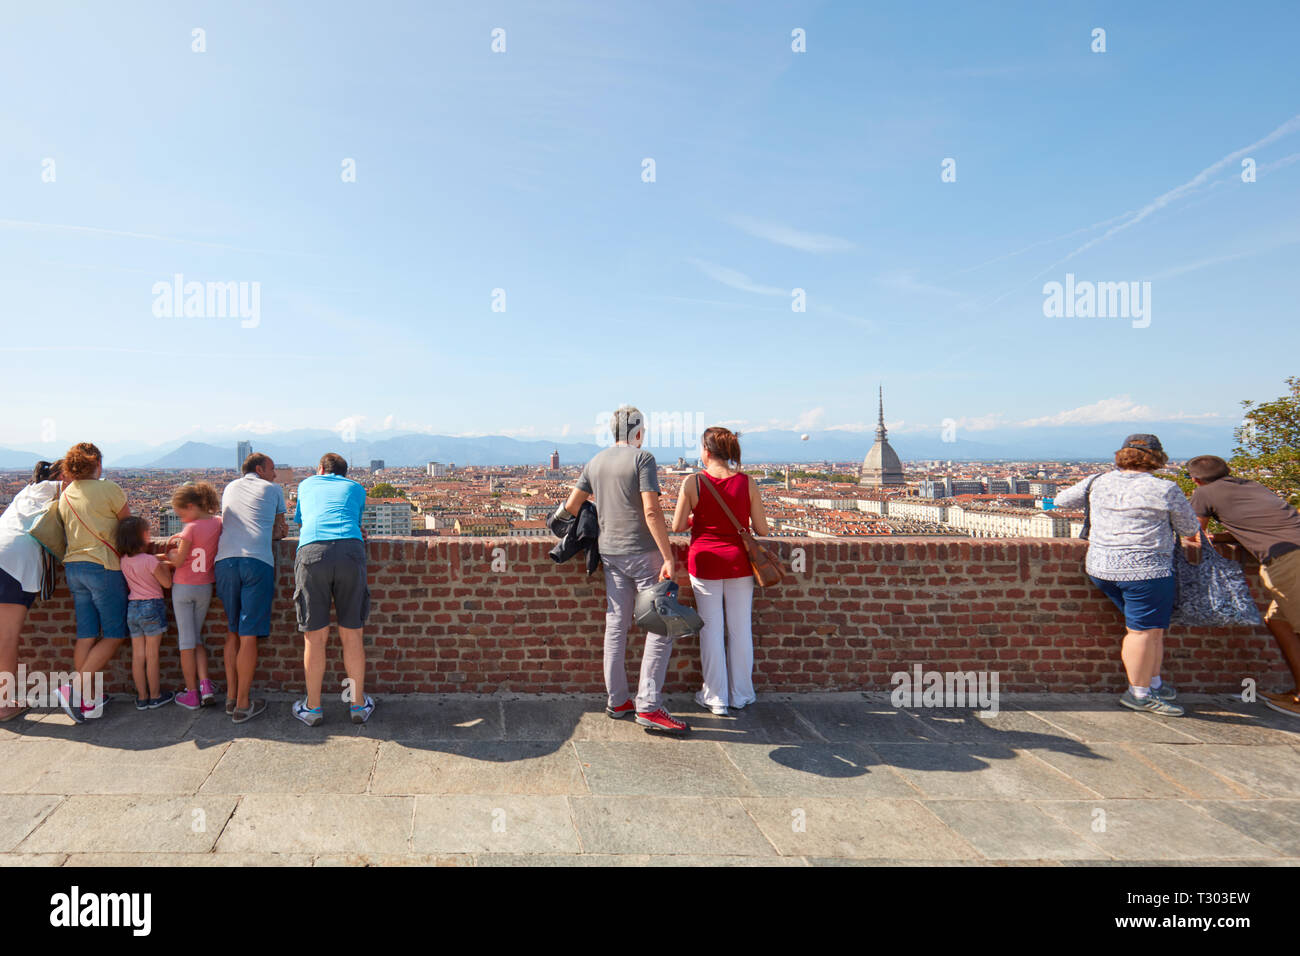 TURIN, ITALY - AUGUST 20, 2017: People and tourists looking at Turin skyline from Cappuccini hill balustrade in a sunny day in Italy. Stock Photo